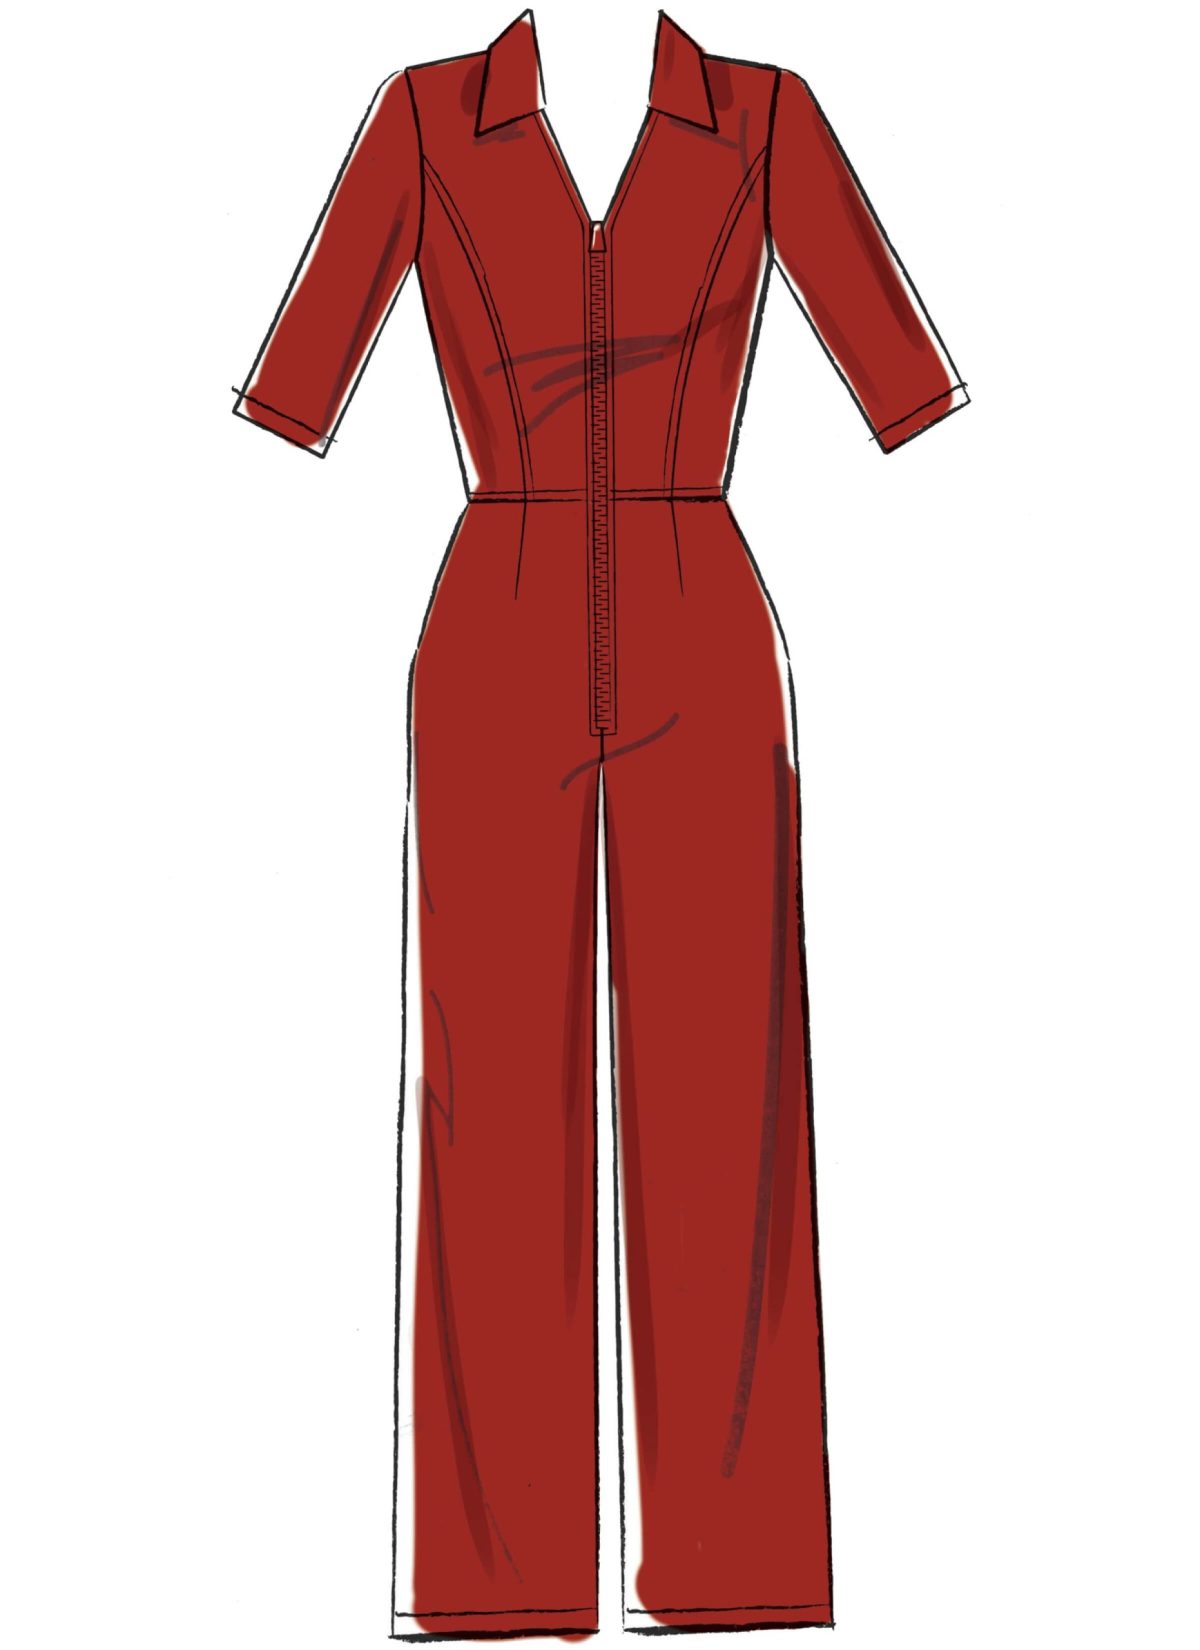 McCall's Sewing Pattern M7908 Misses'/Miss Petite Jumpsuits